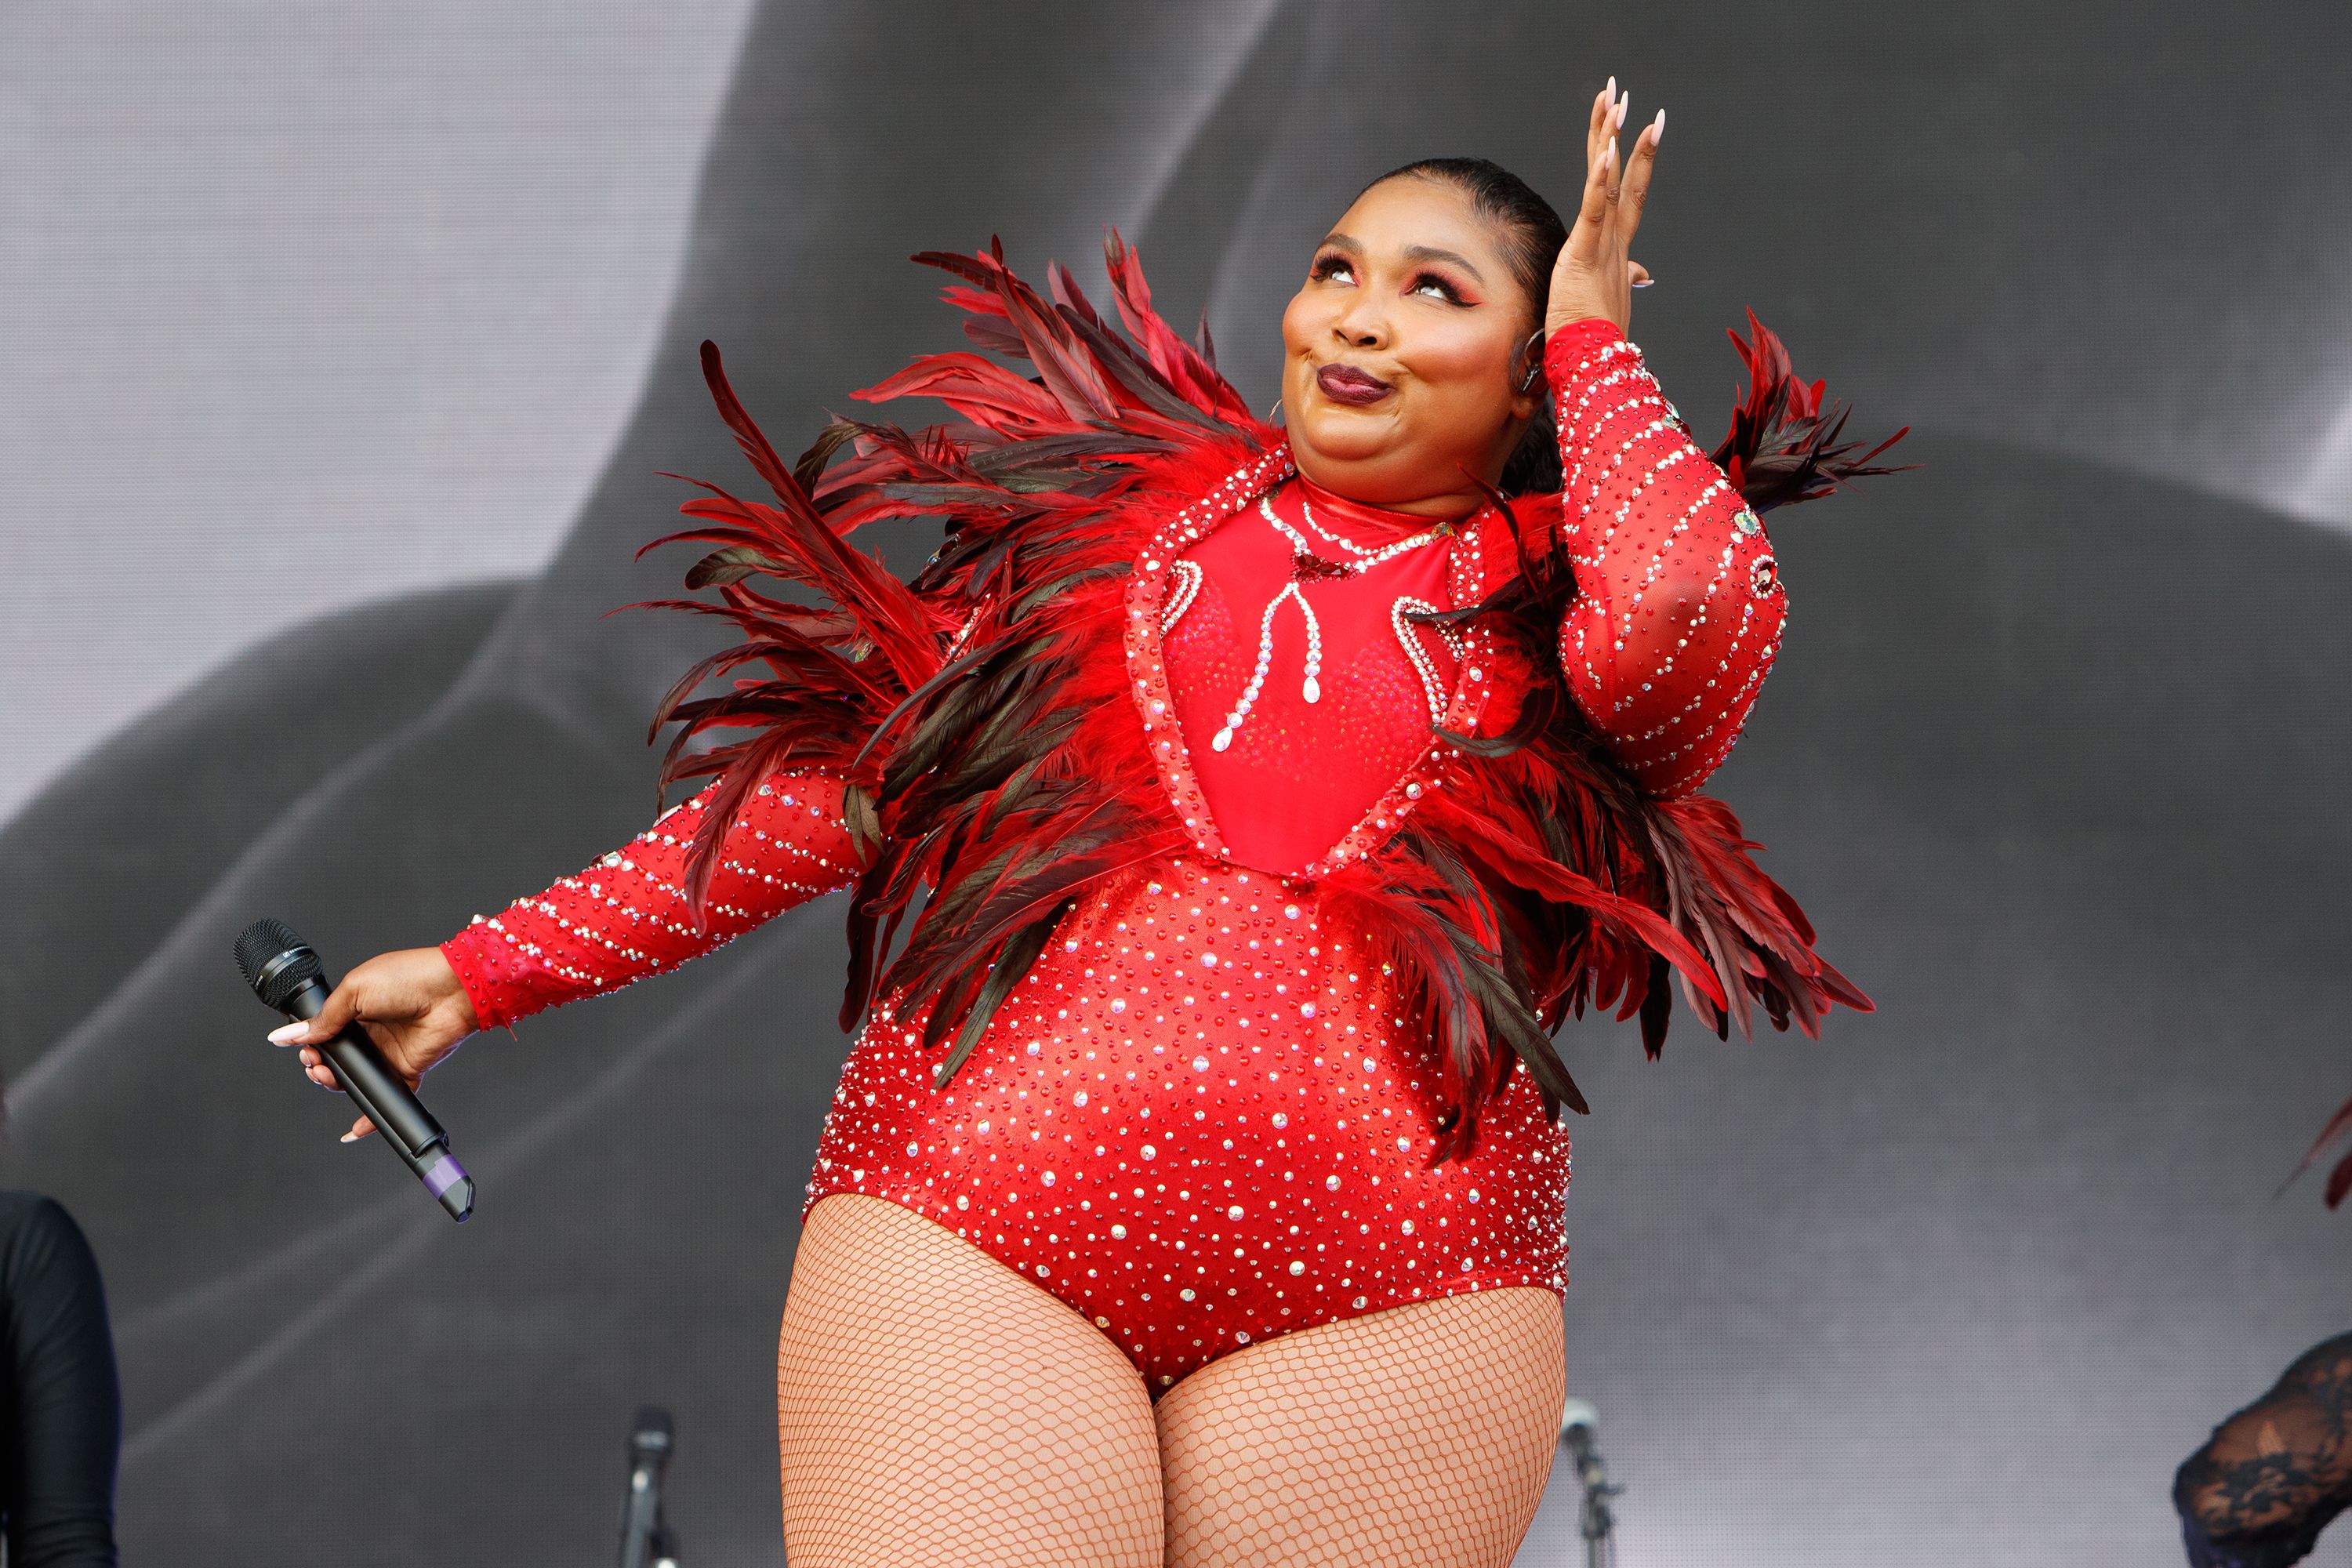 Lizzo's Best Outfits - Fashion and Beauty Photos of Lizzo